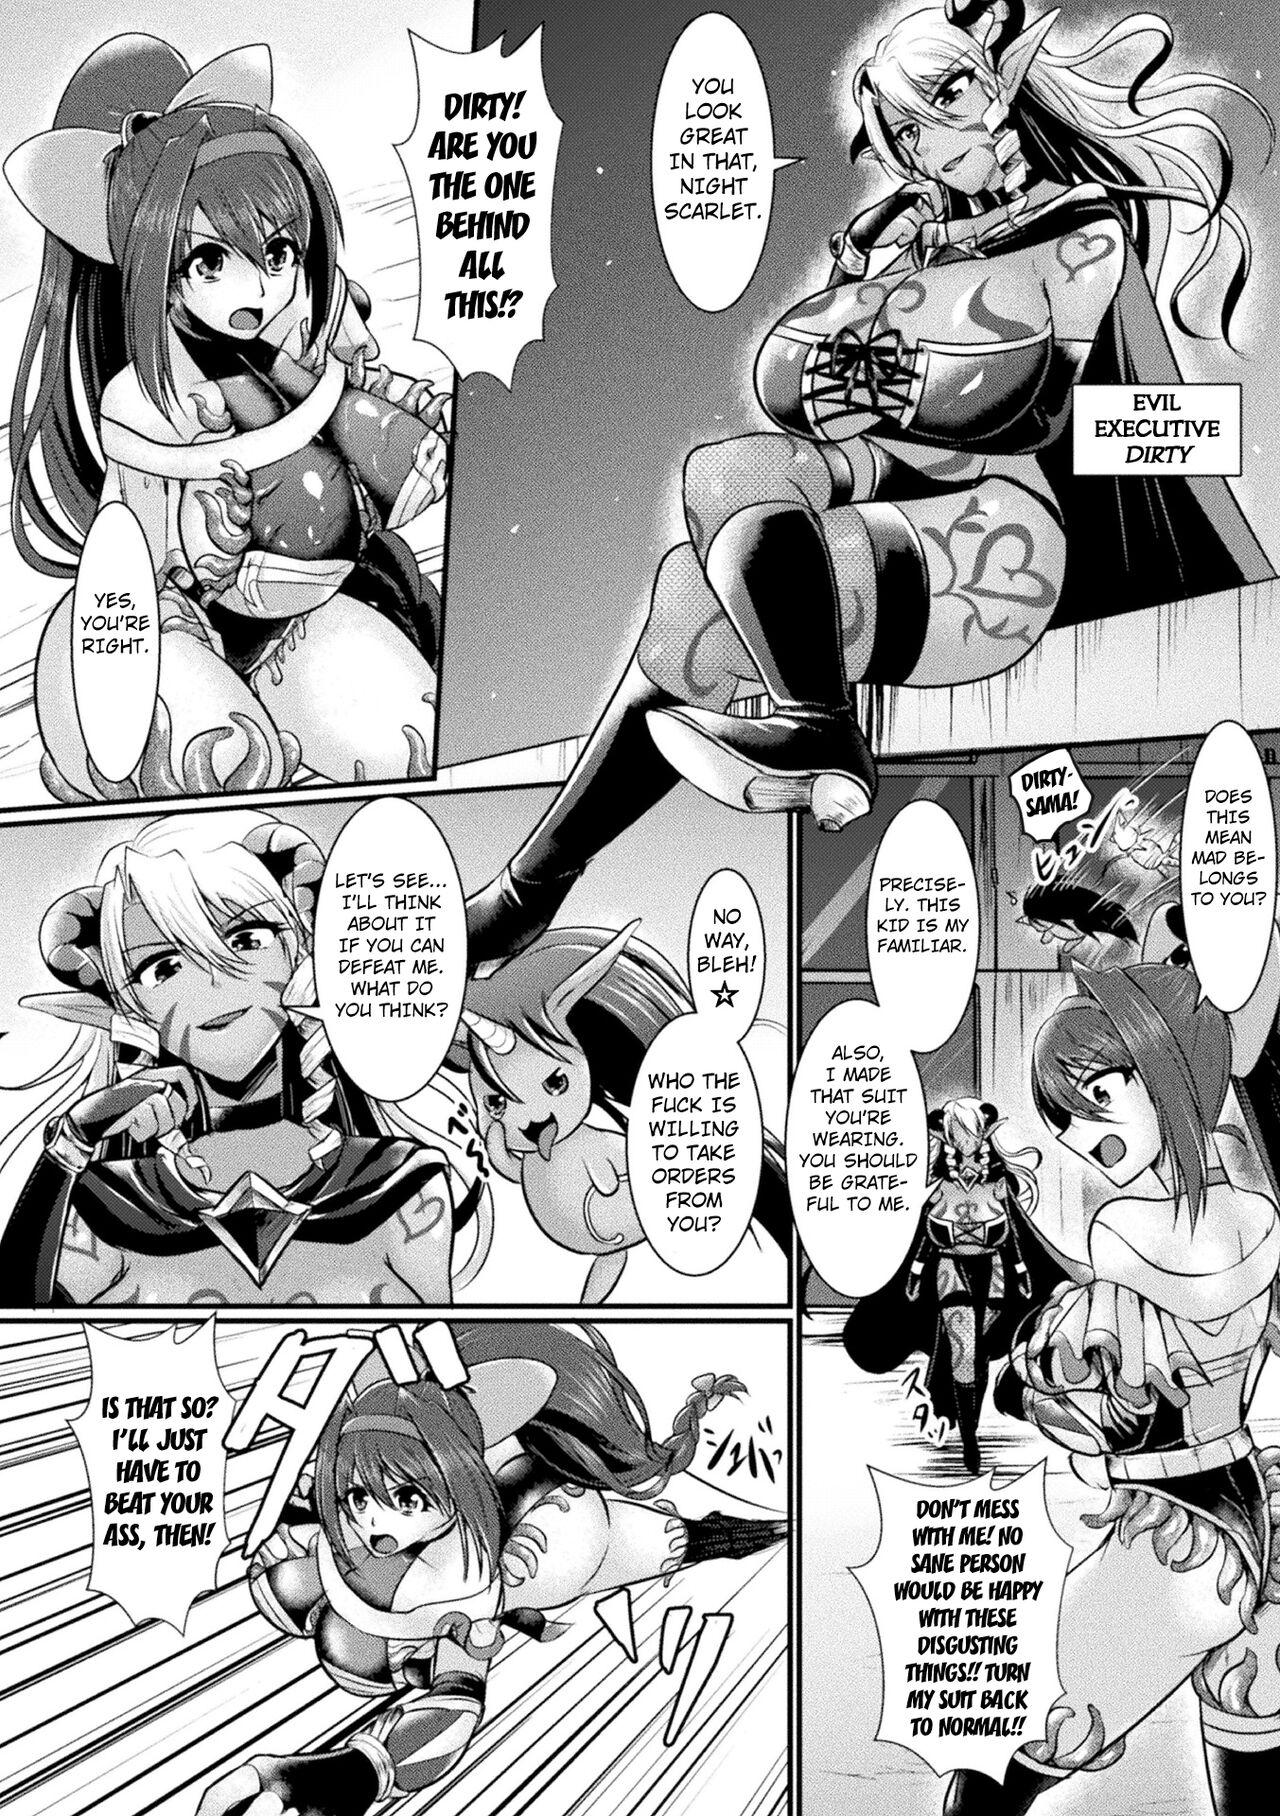 Glasses Yoru no Onna Kenshi Night Scarlet | The Fist Fighter Night Scarlet Anal Porn - Page 6